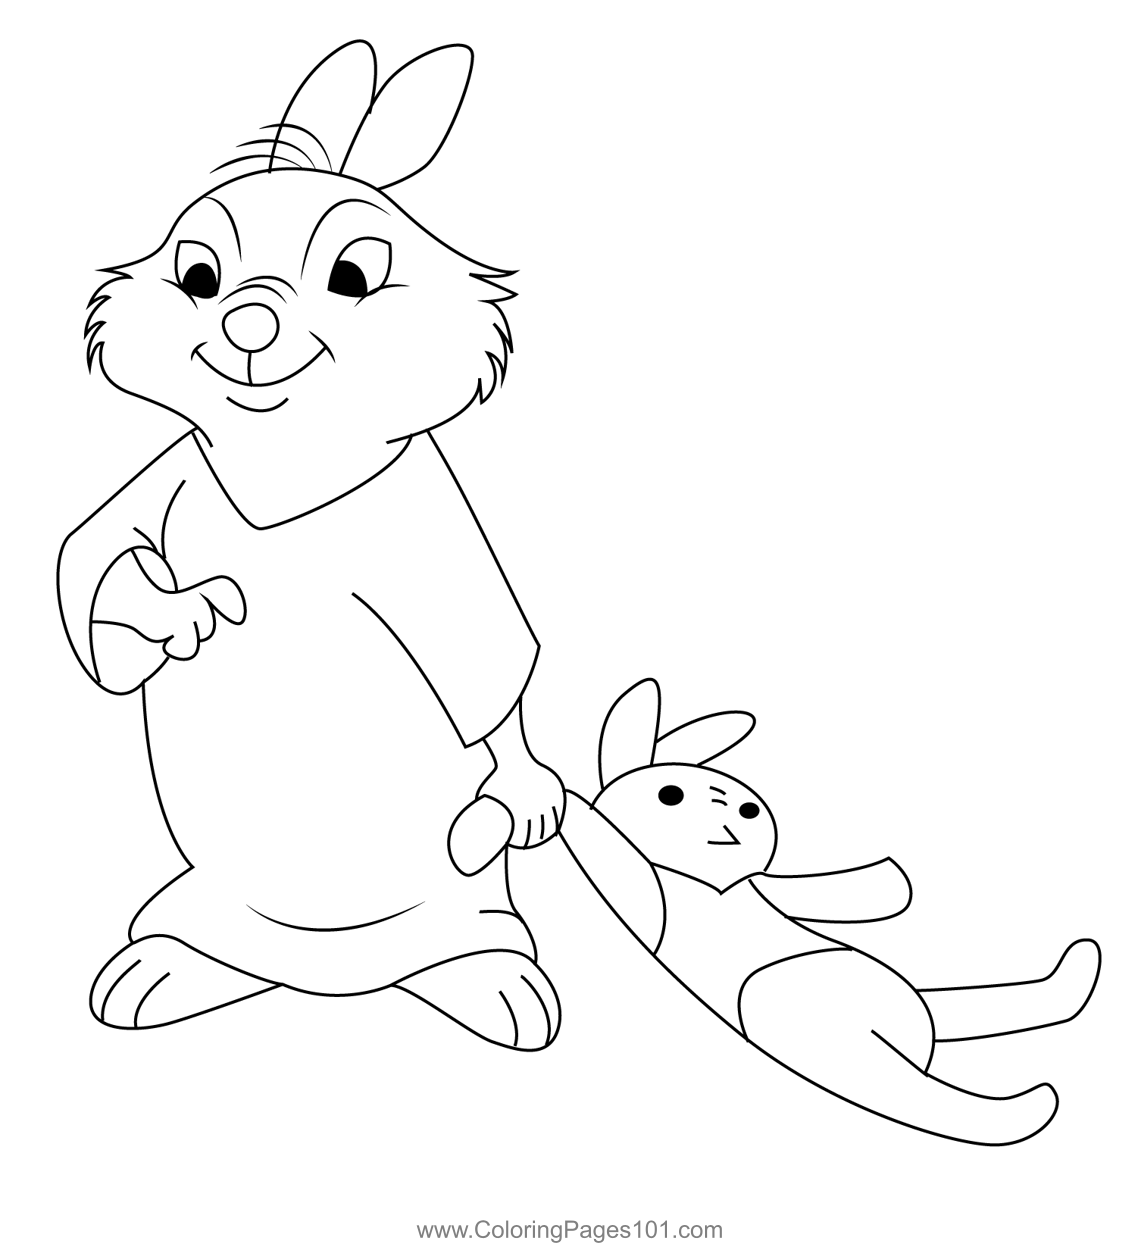 The robin hood bunny coloring page for kids